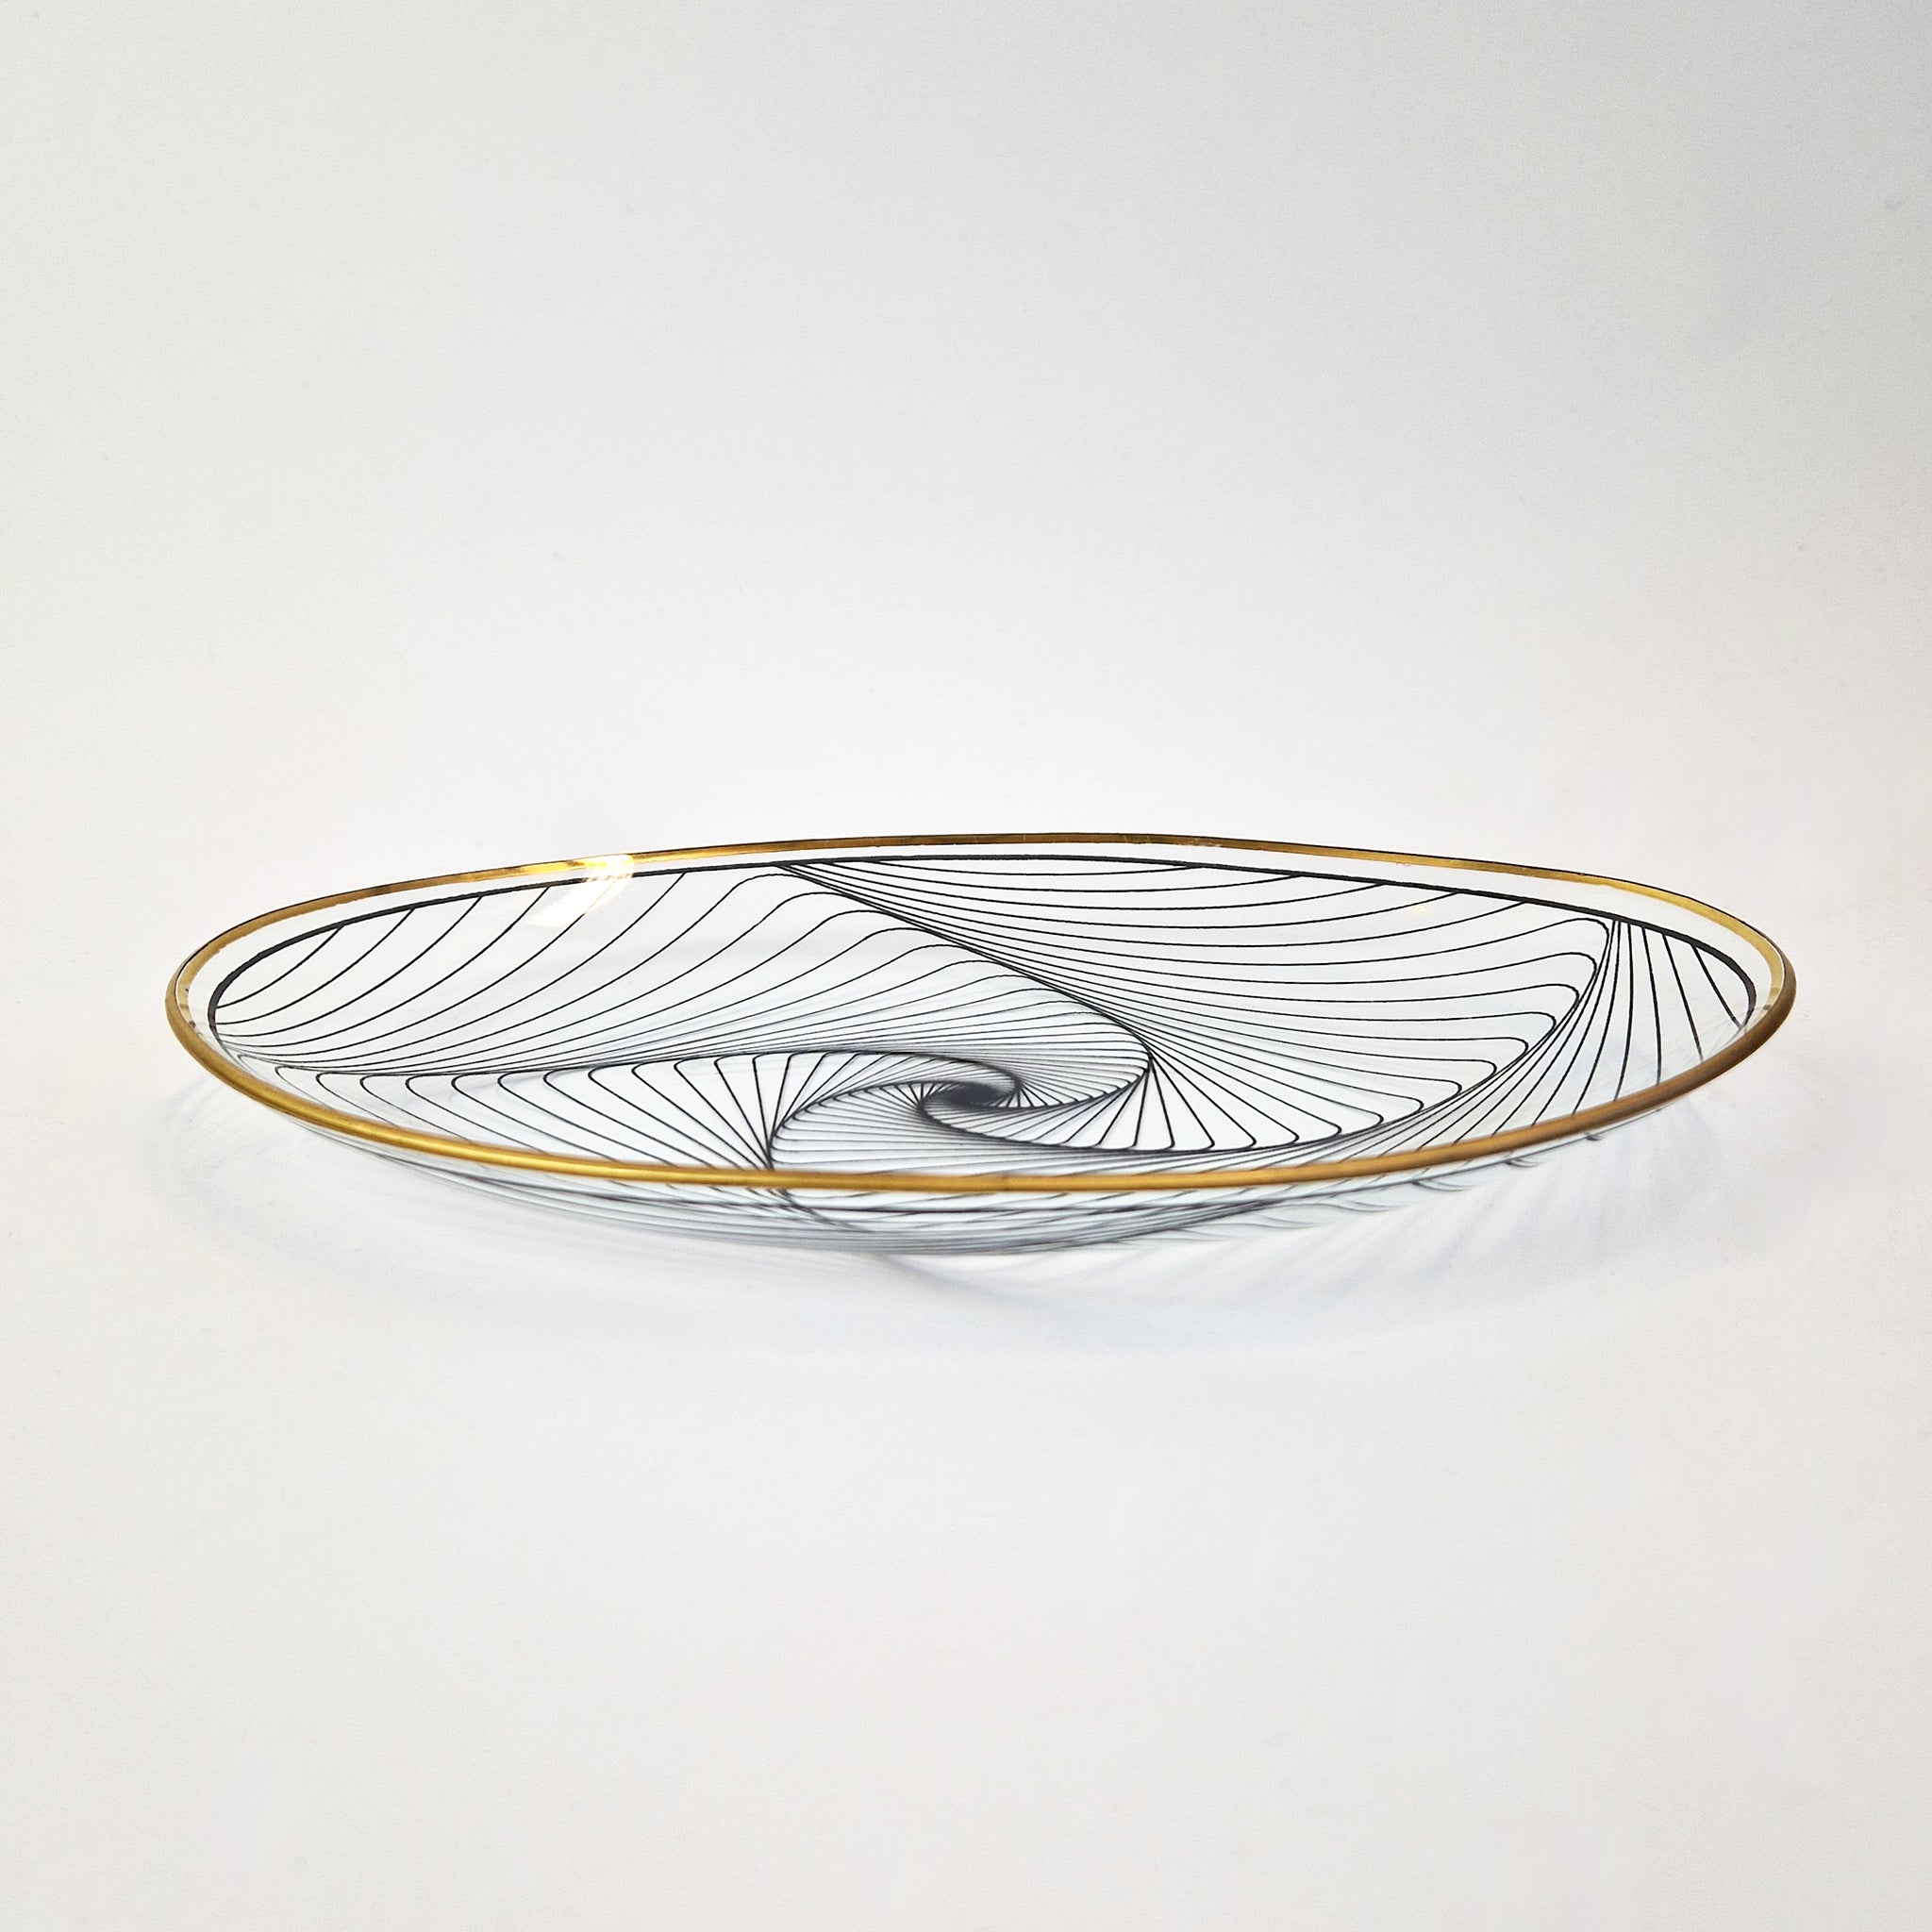 Vintage oval glass dish with swirly pattern